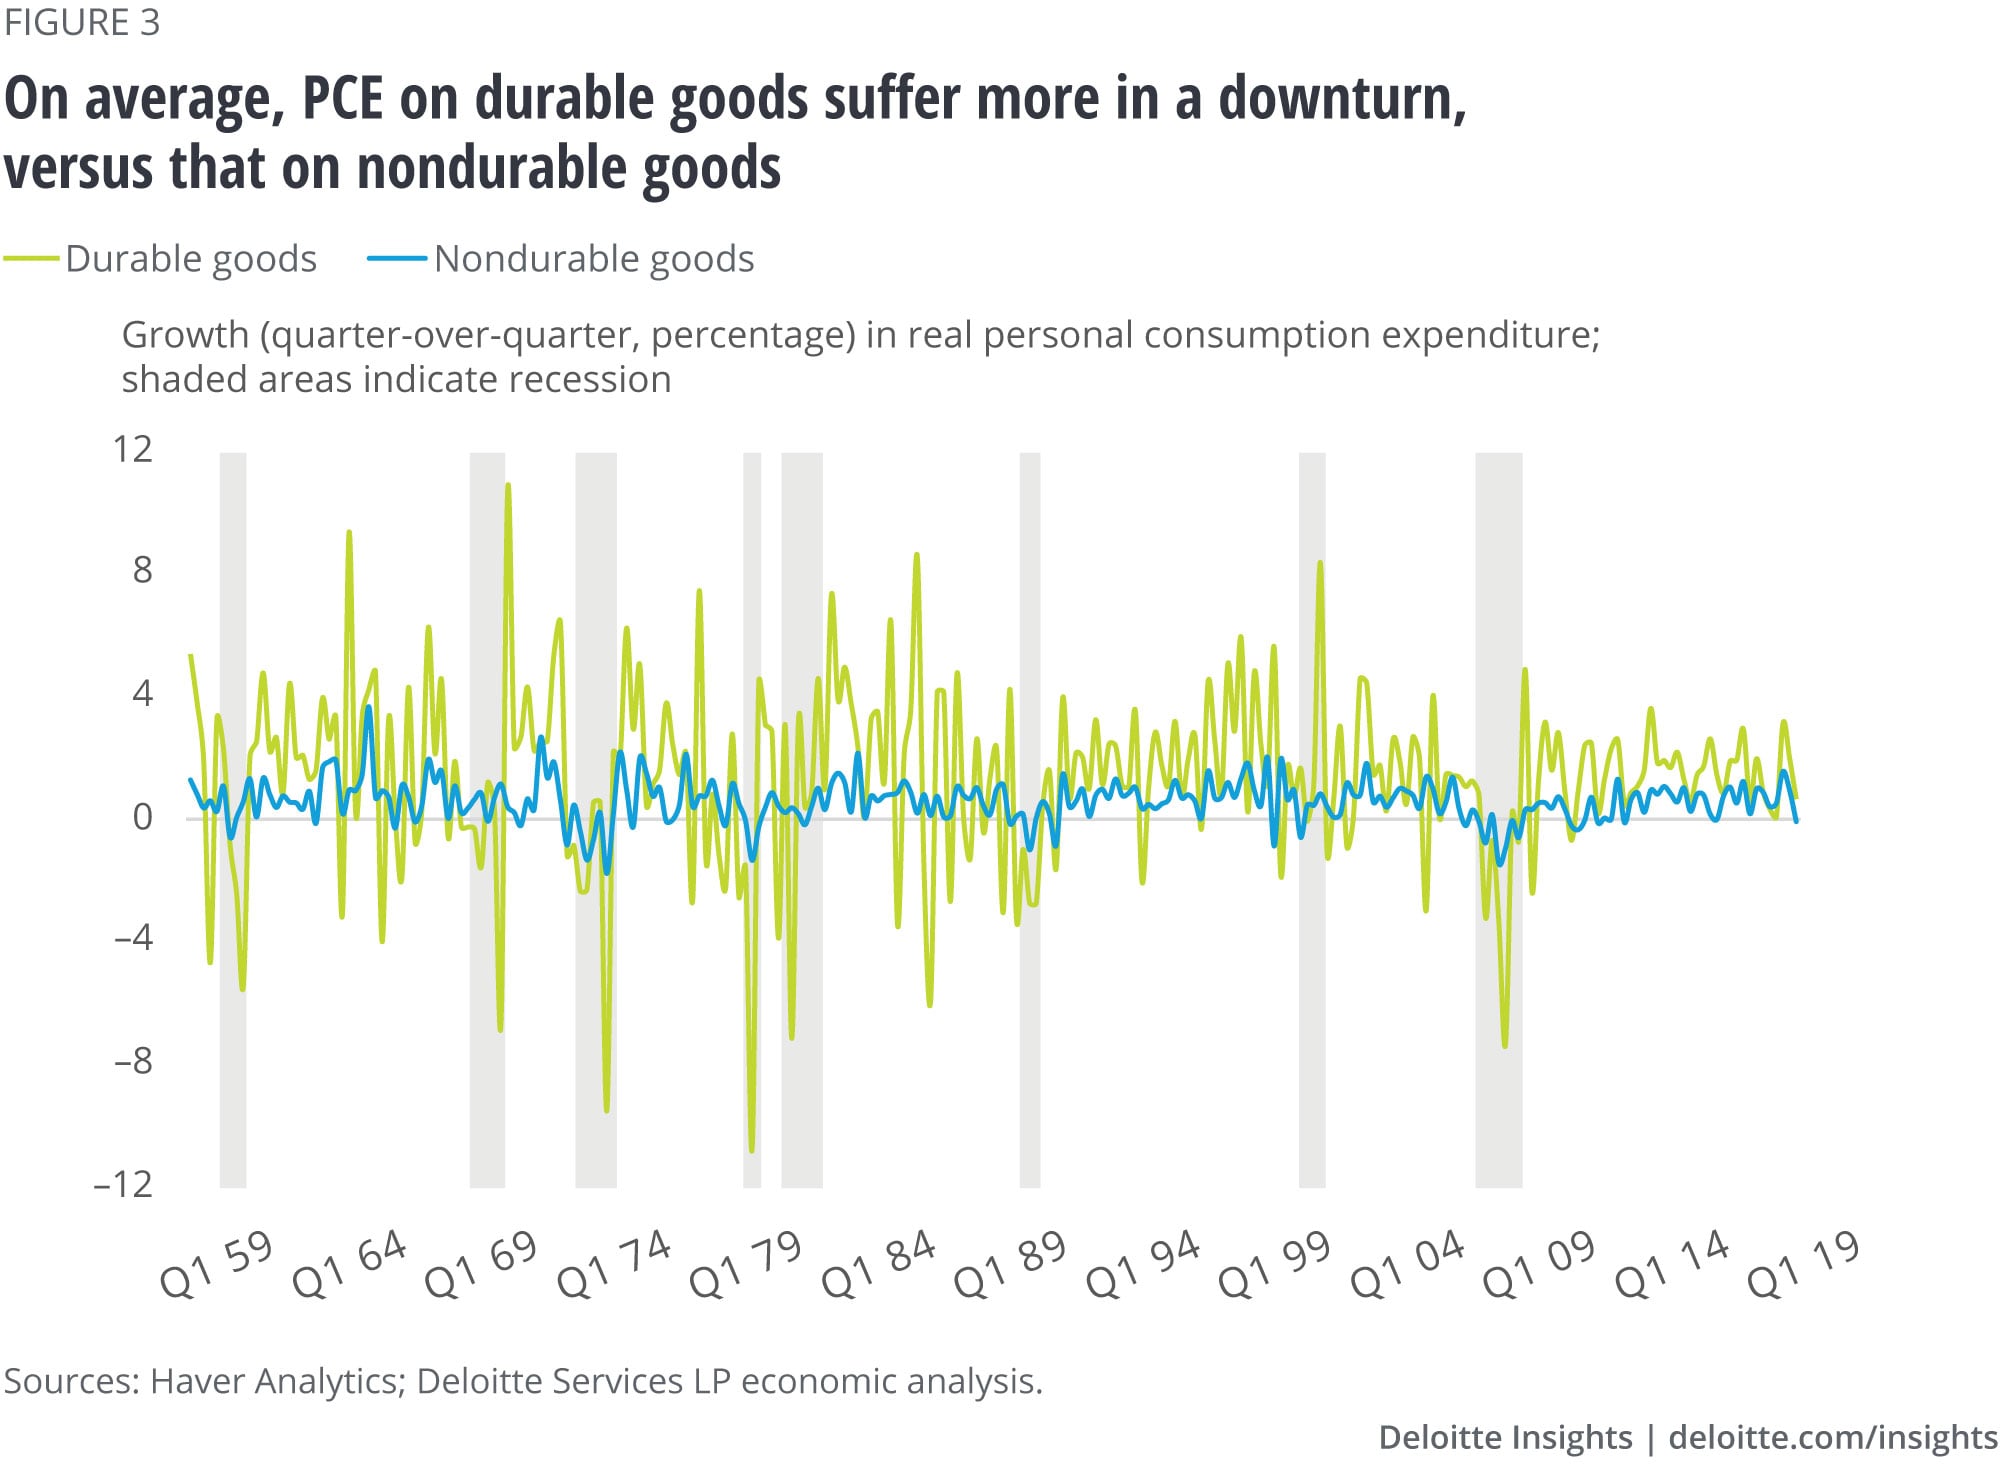 PCE on durable goods suffer more, on average, in a downturn than on nondurable goods